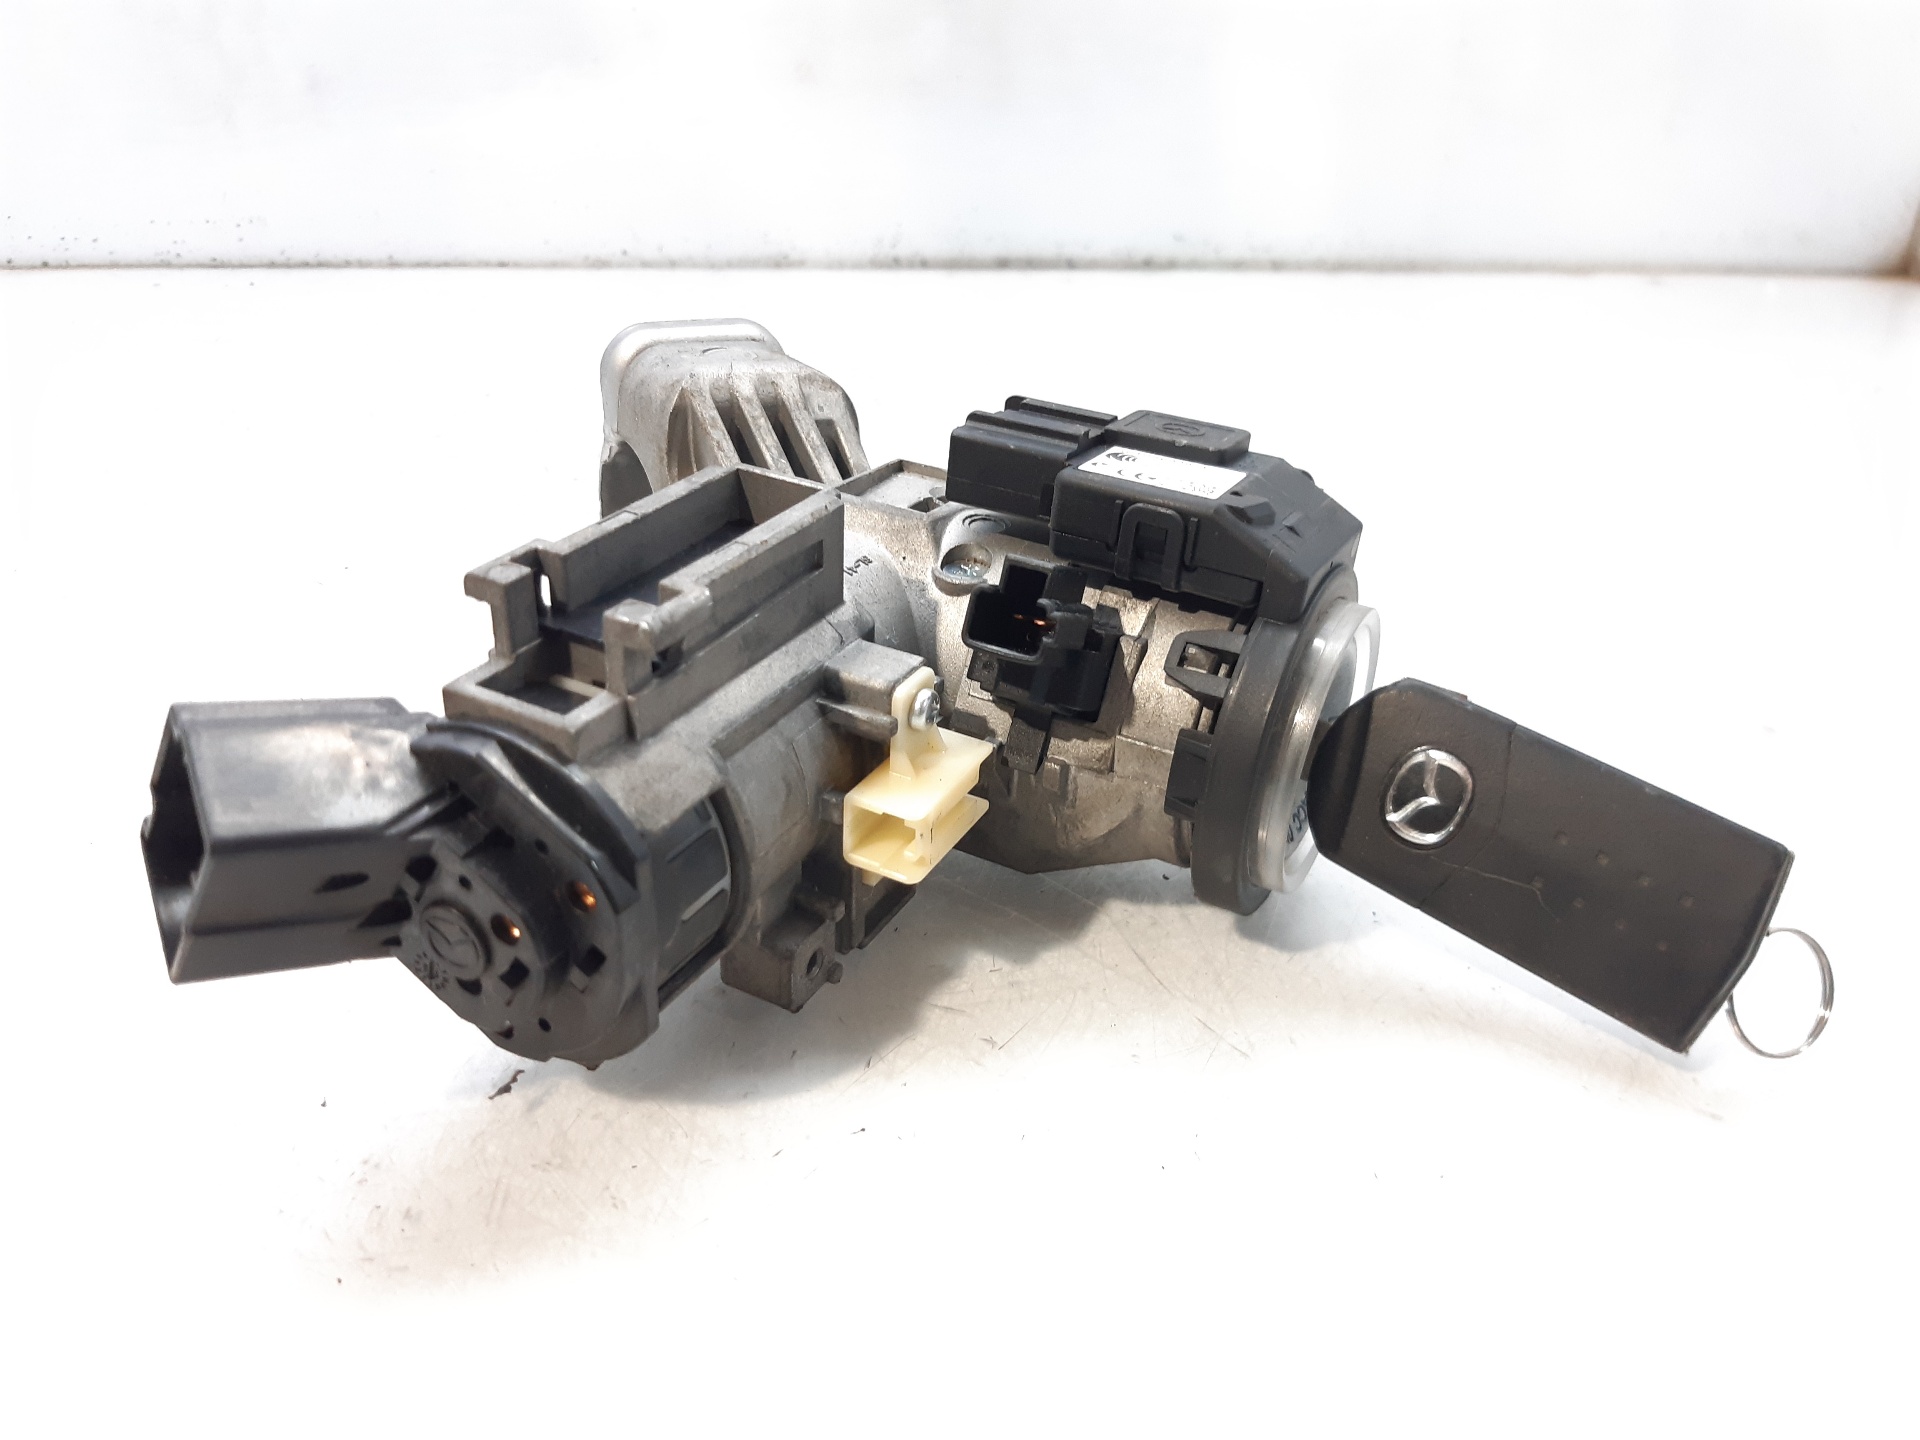 MAZDA 6 GH (2007-2013) Ignition Lock GS1D66938A 18746095